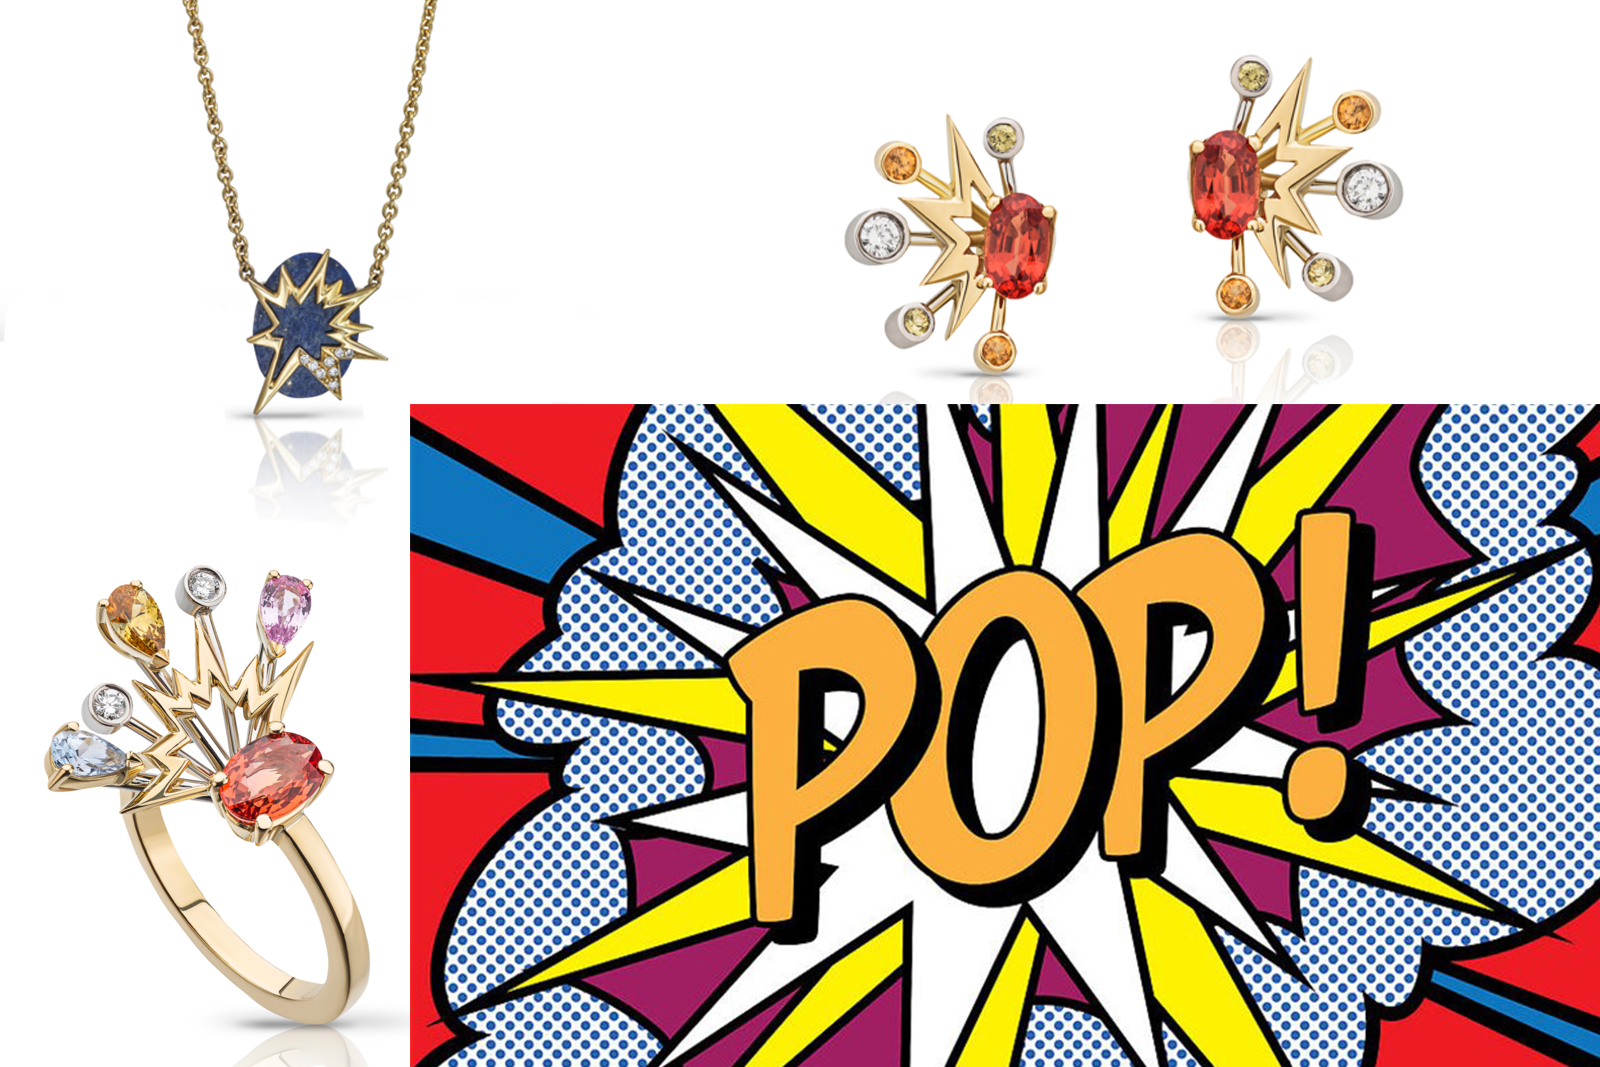 Le Ster (clockwise from bottom left) 'Zadie' ring with diamonds and fancy coloured sapphires in 18K yellow gold and platinum, 'Frida' pendant with diamonds and lapis lazuli, and 'Zadie' earrings with diamonds and fancy coloured sapphires in 18K yellow gold and platinum, with pop art by Roy Lichenstein